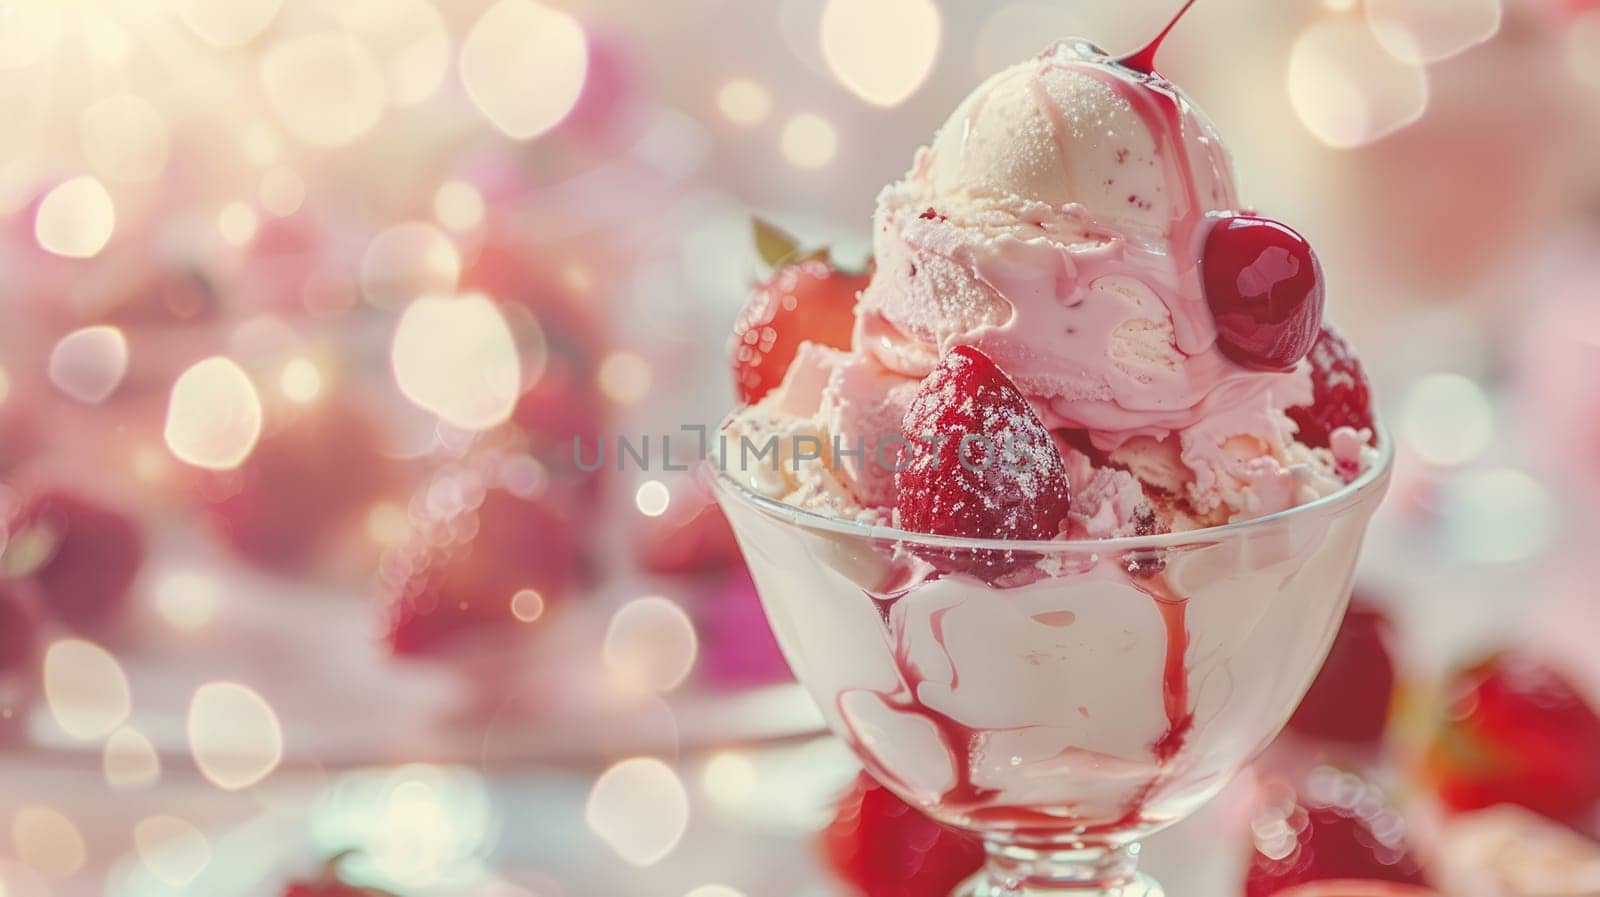 A glass of ice cream with strawberries and cherry on top